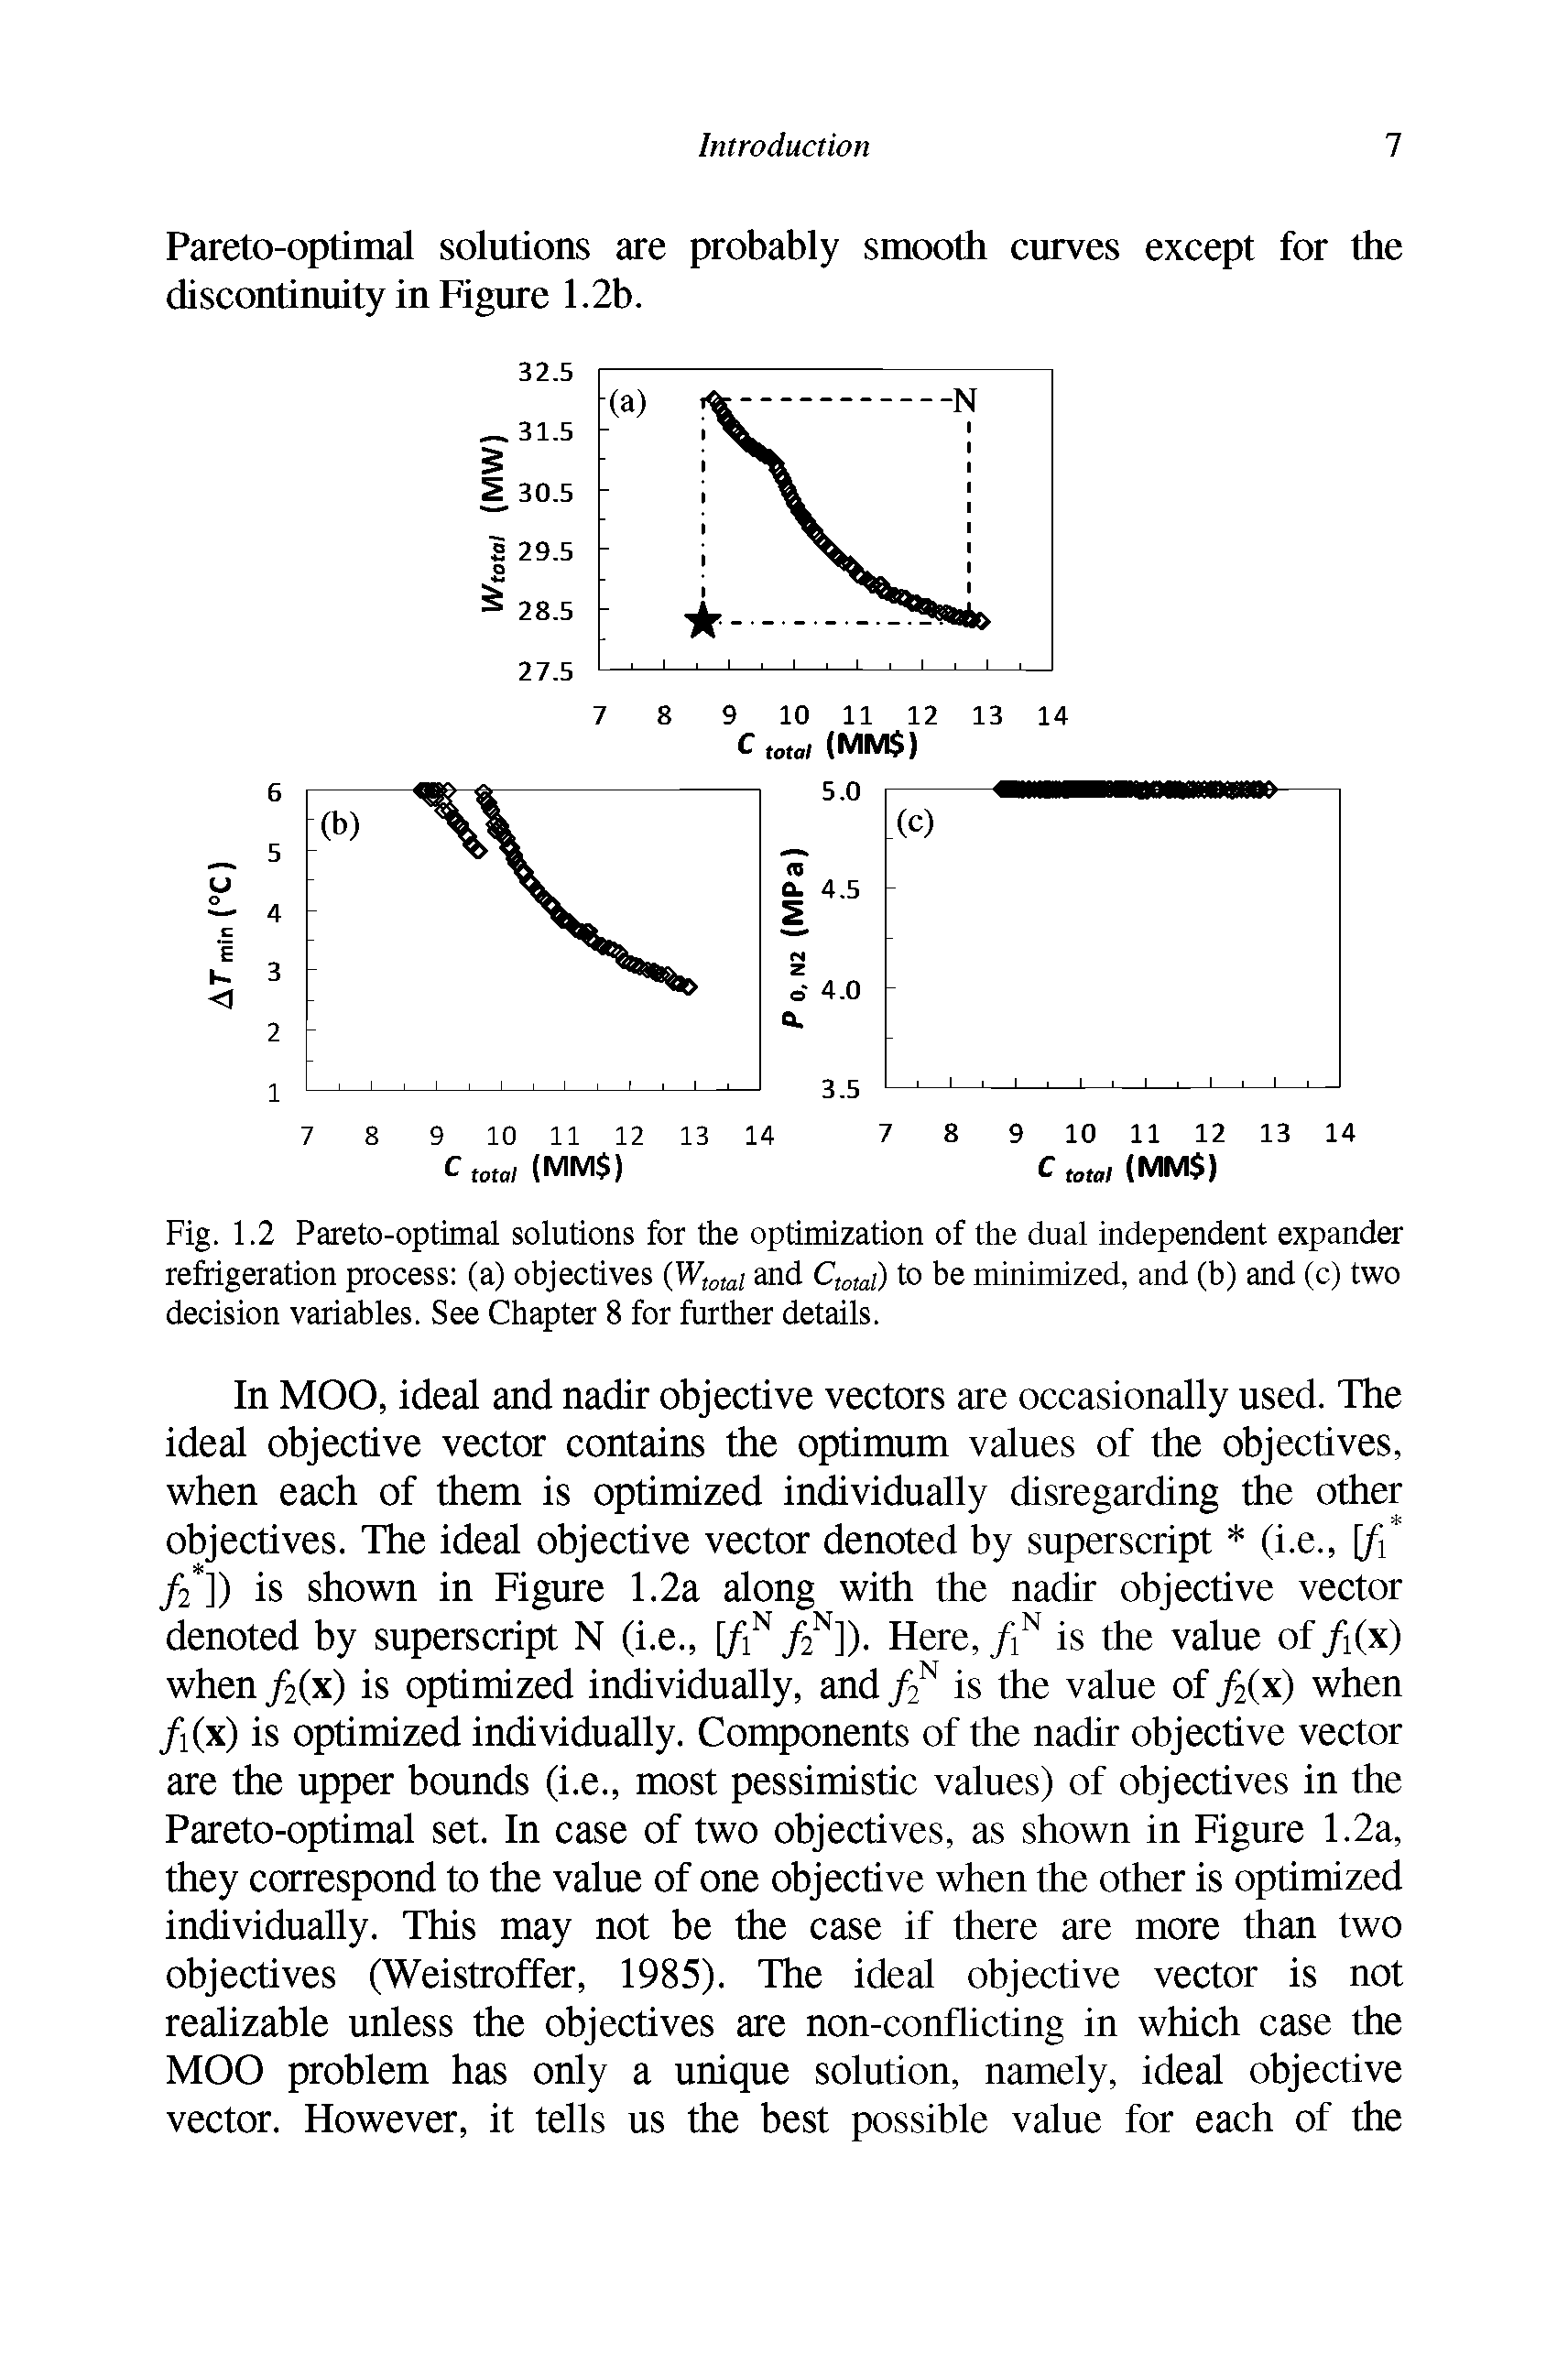 Fig. 1.2 Pareto-optimal solutions for the optimization of the dual independent expander refrigeration process (a) objectives and ,0 1) to be minimized, and (b) and (c) two decision variables. See Chapter 8 for further details.